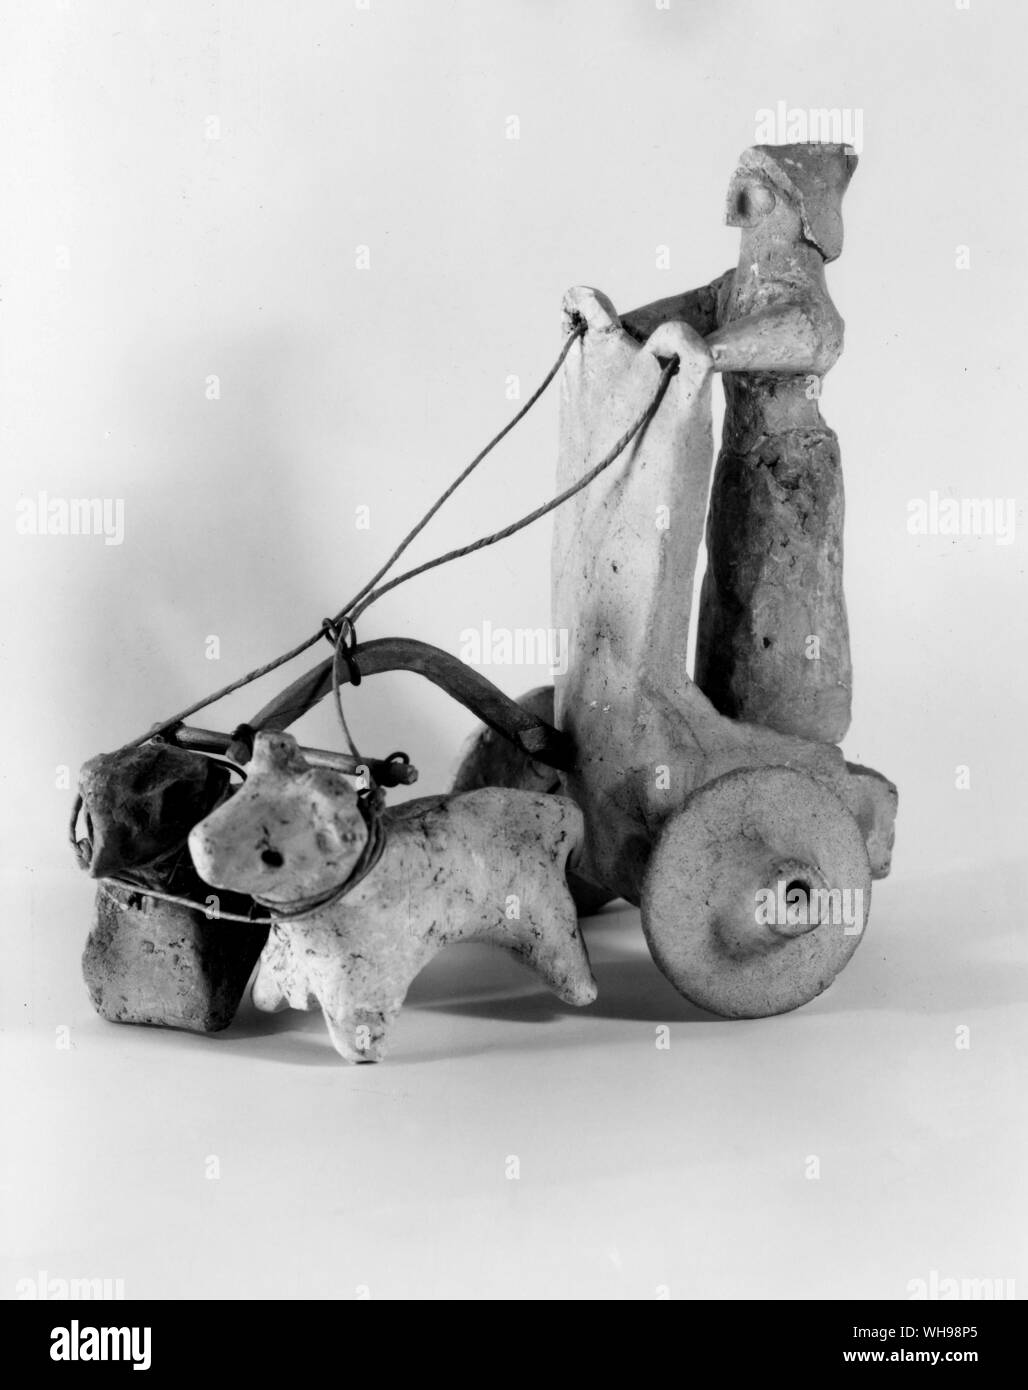 Eastern warfare/ Mesopotamia/Ur: Pottery model of a chariot and rider, c. 2000 B.C. Stock Photo